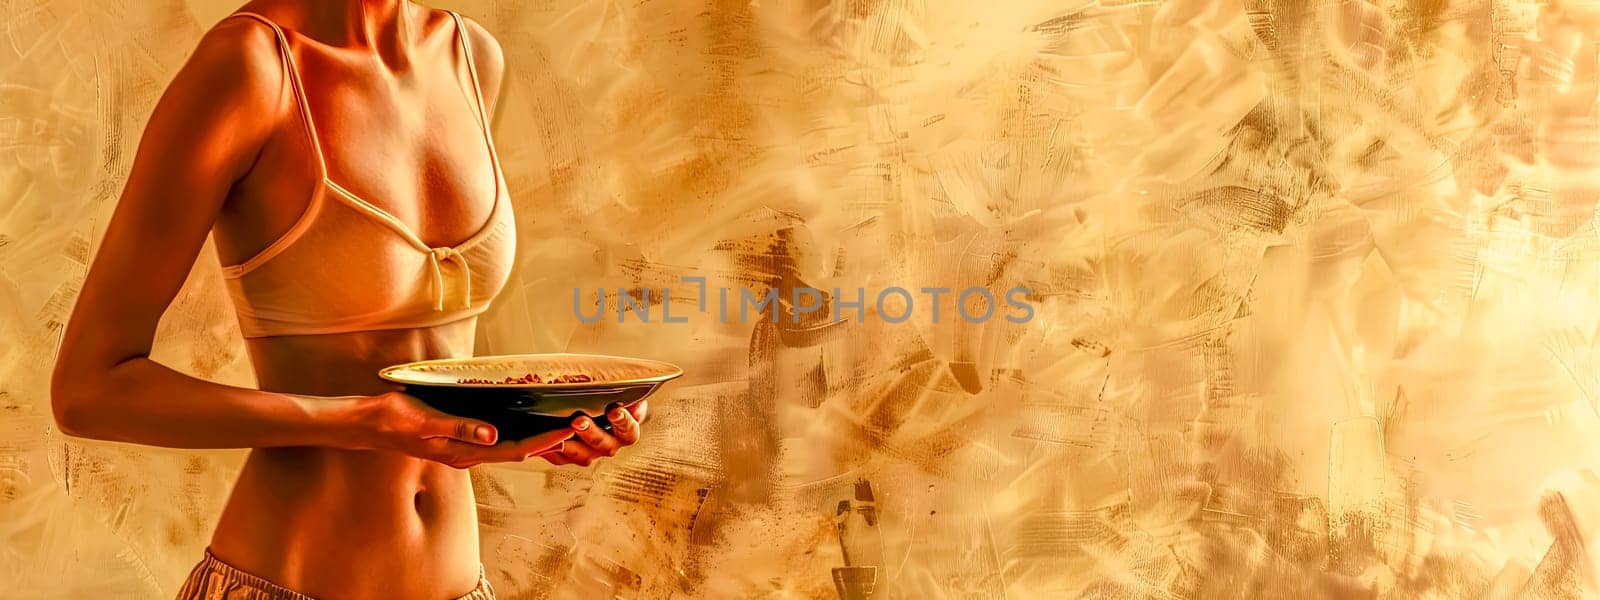 Elegant woman holds a bowl against an abstract backdrop, bathed in golden light